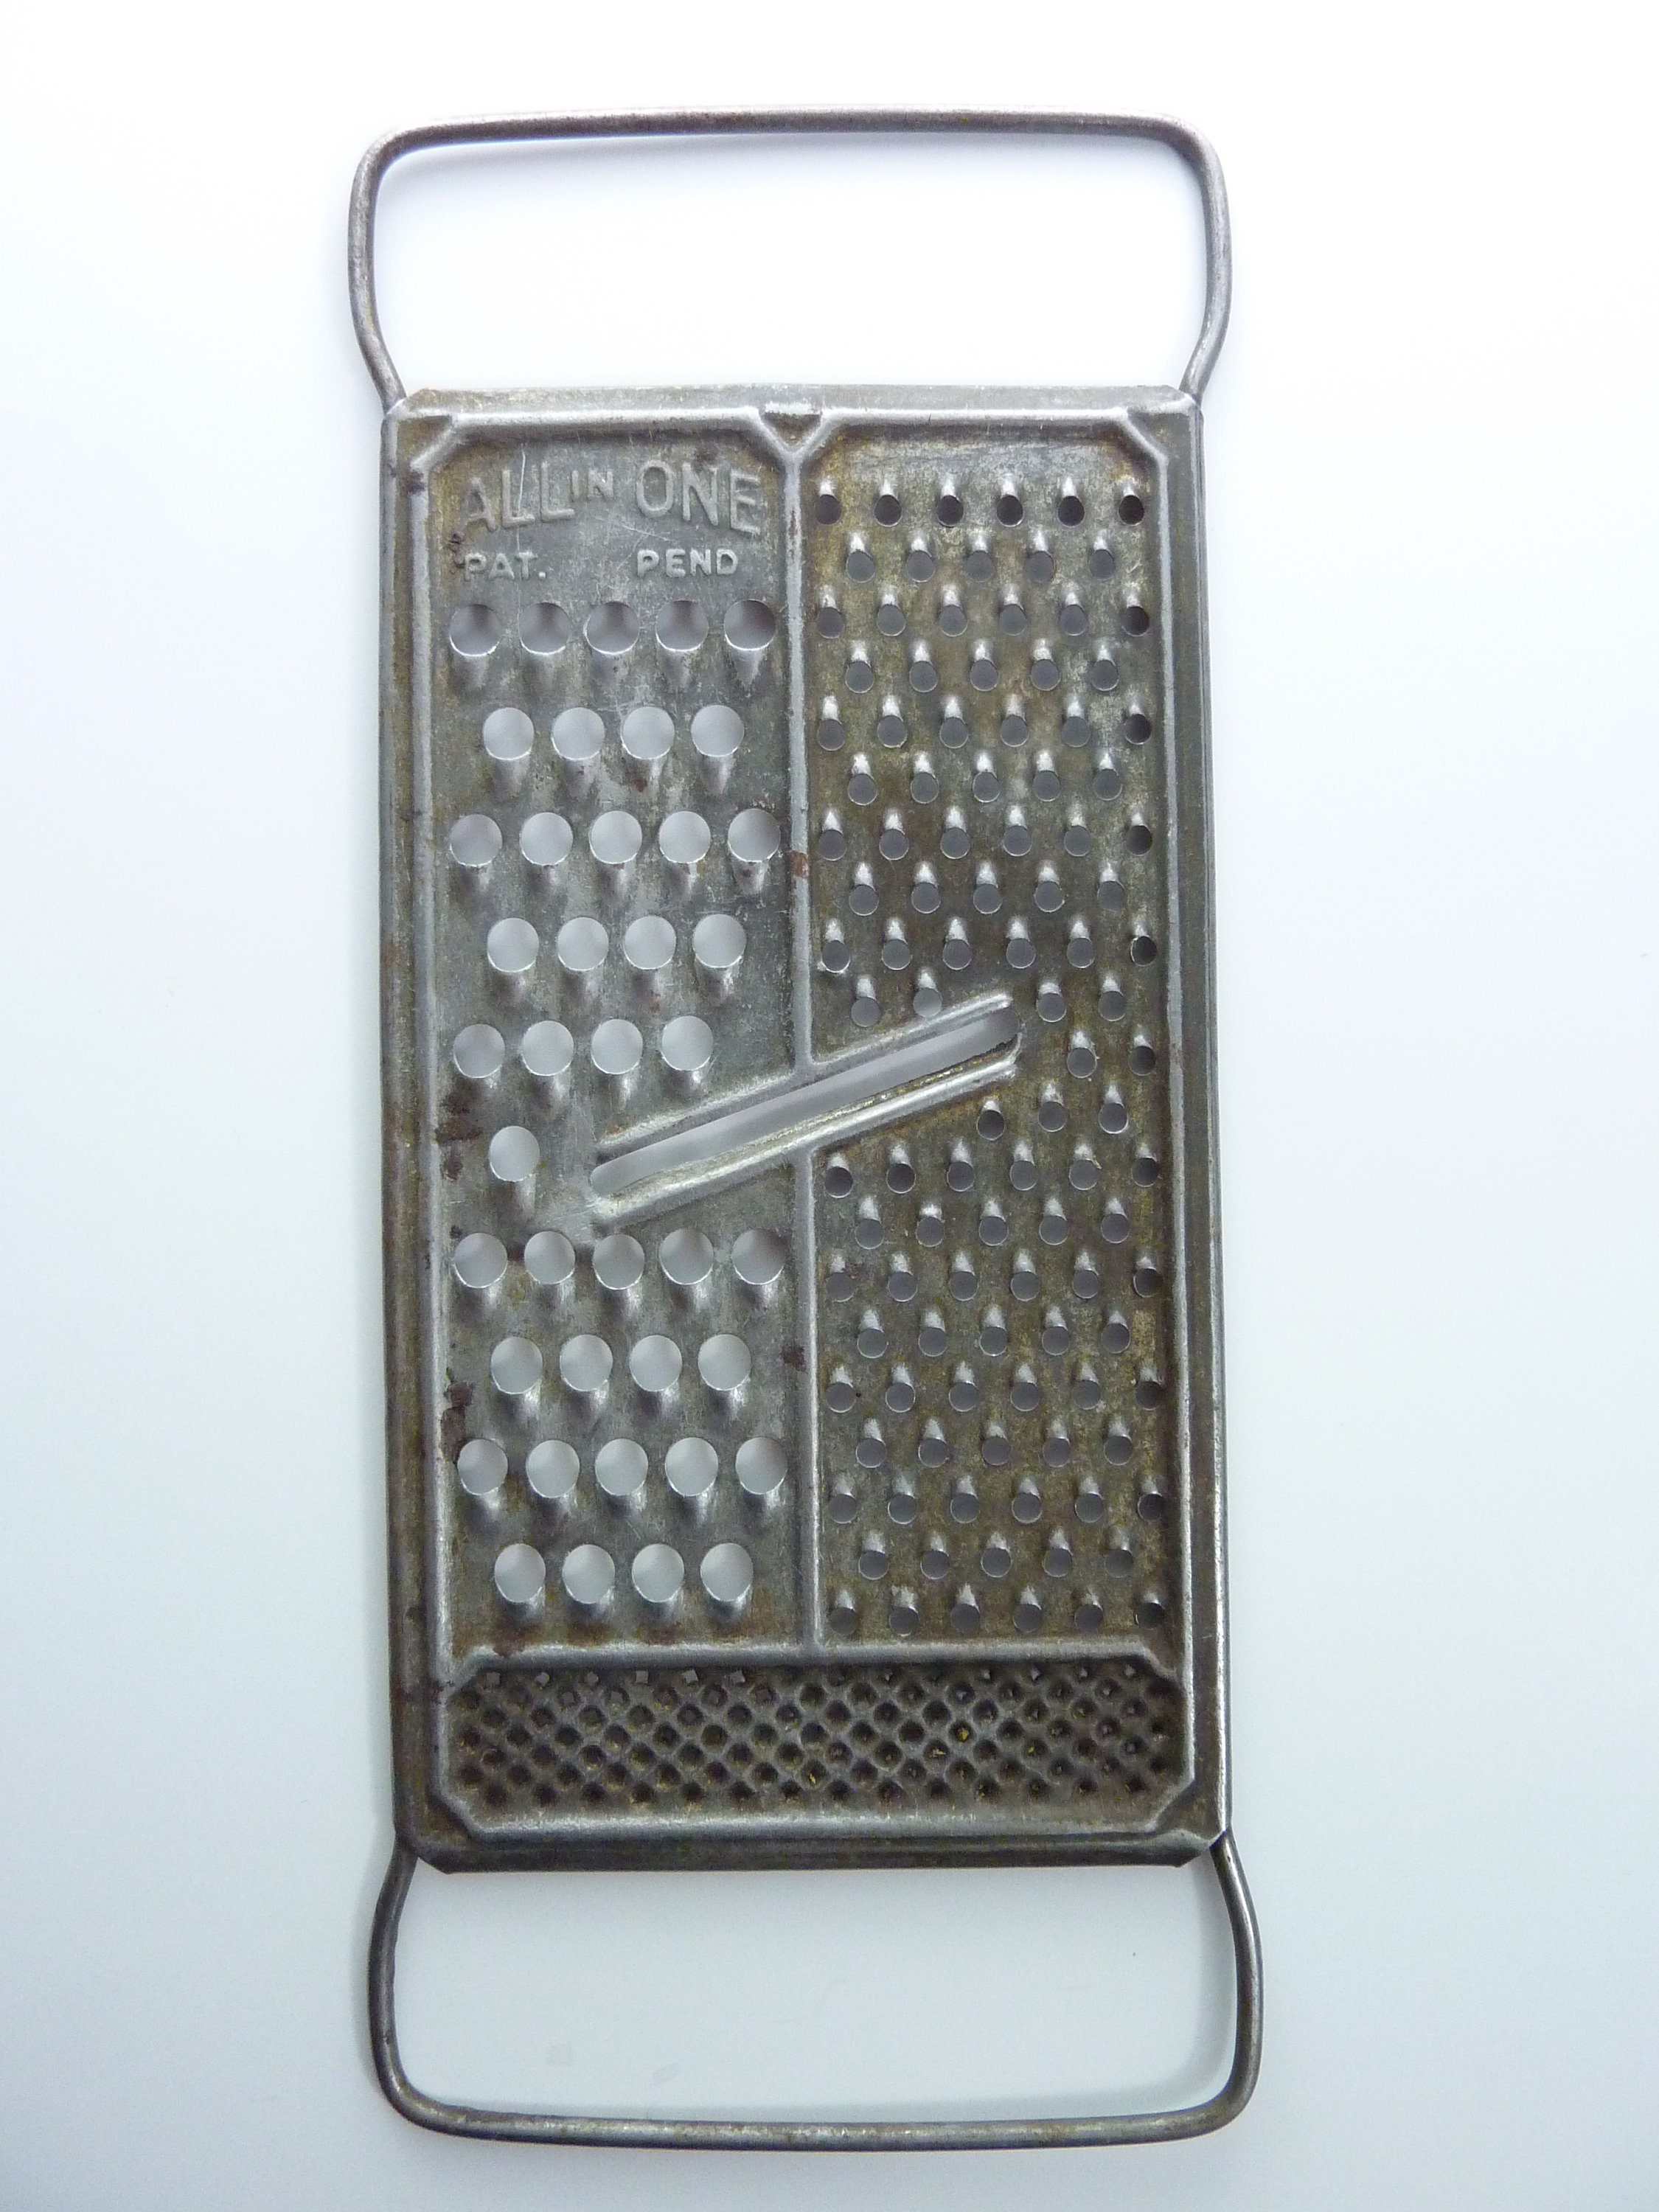 5-Minute DIY: Turn a Cheese Grater Into an Earring Caddy - Brit + Co